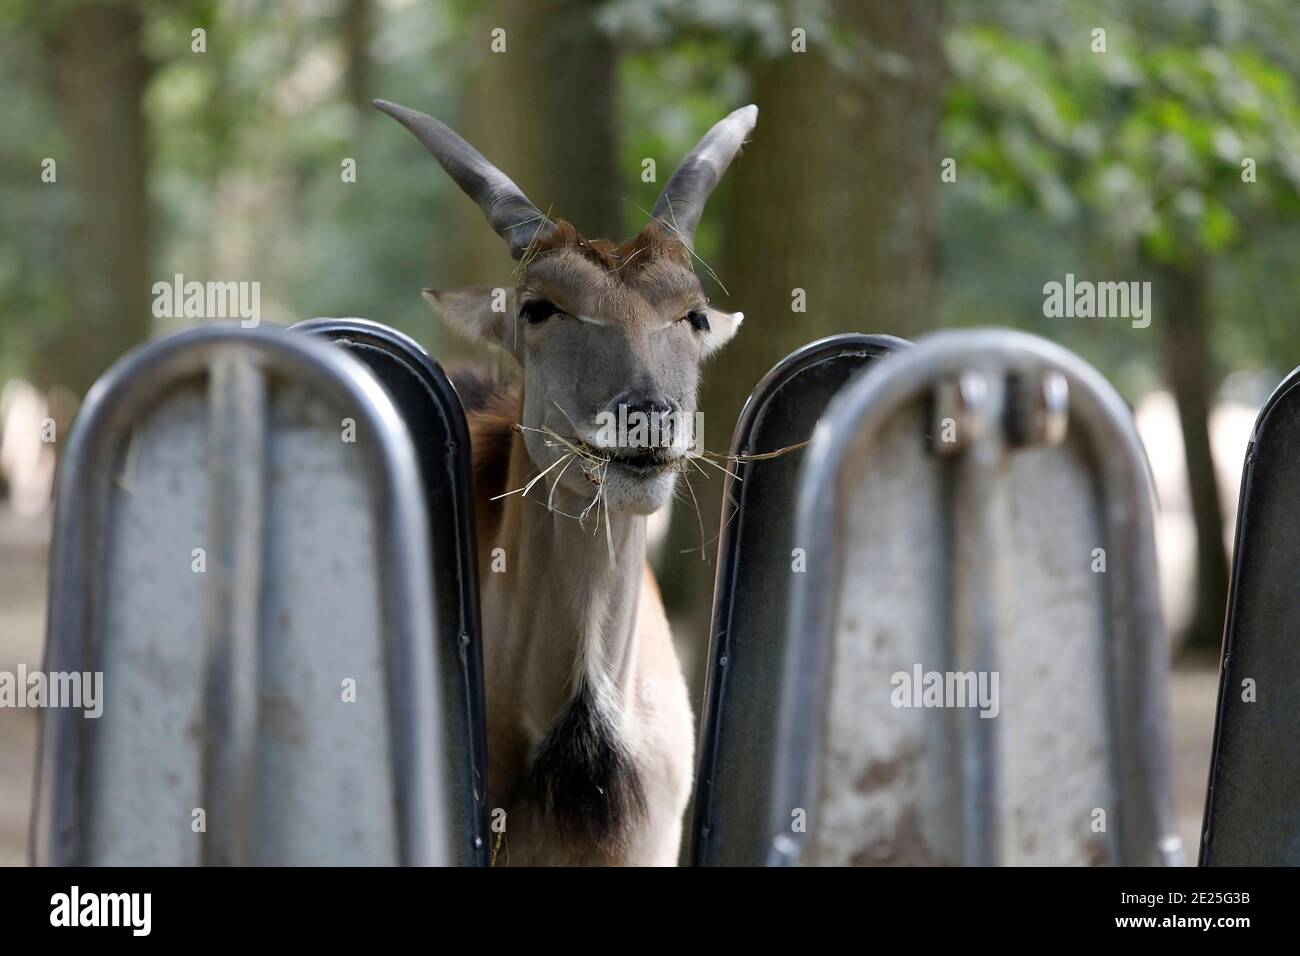 Bongo eating in Thoiry zoo park, France Stock Photo